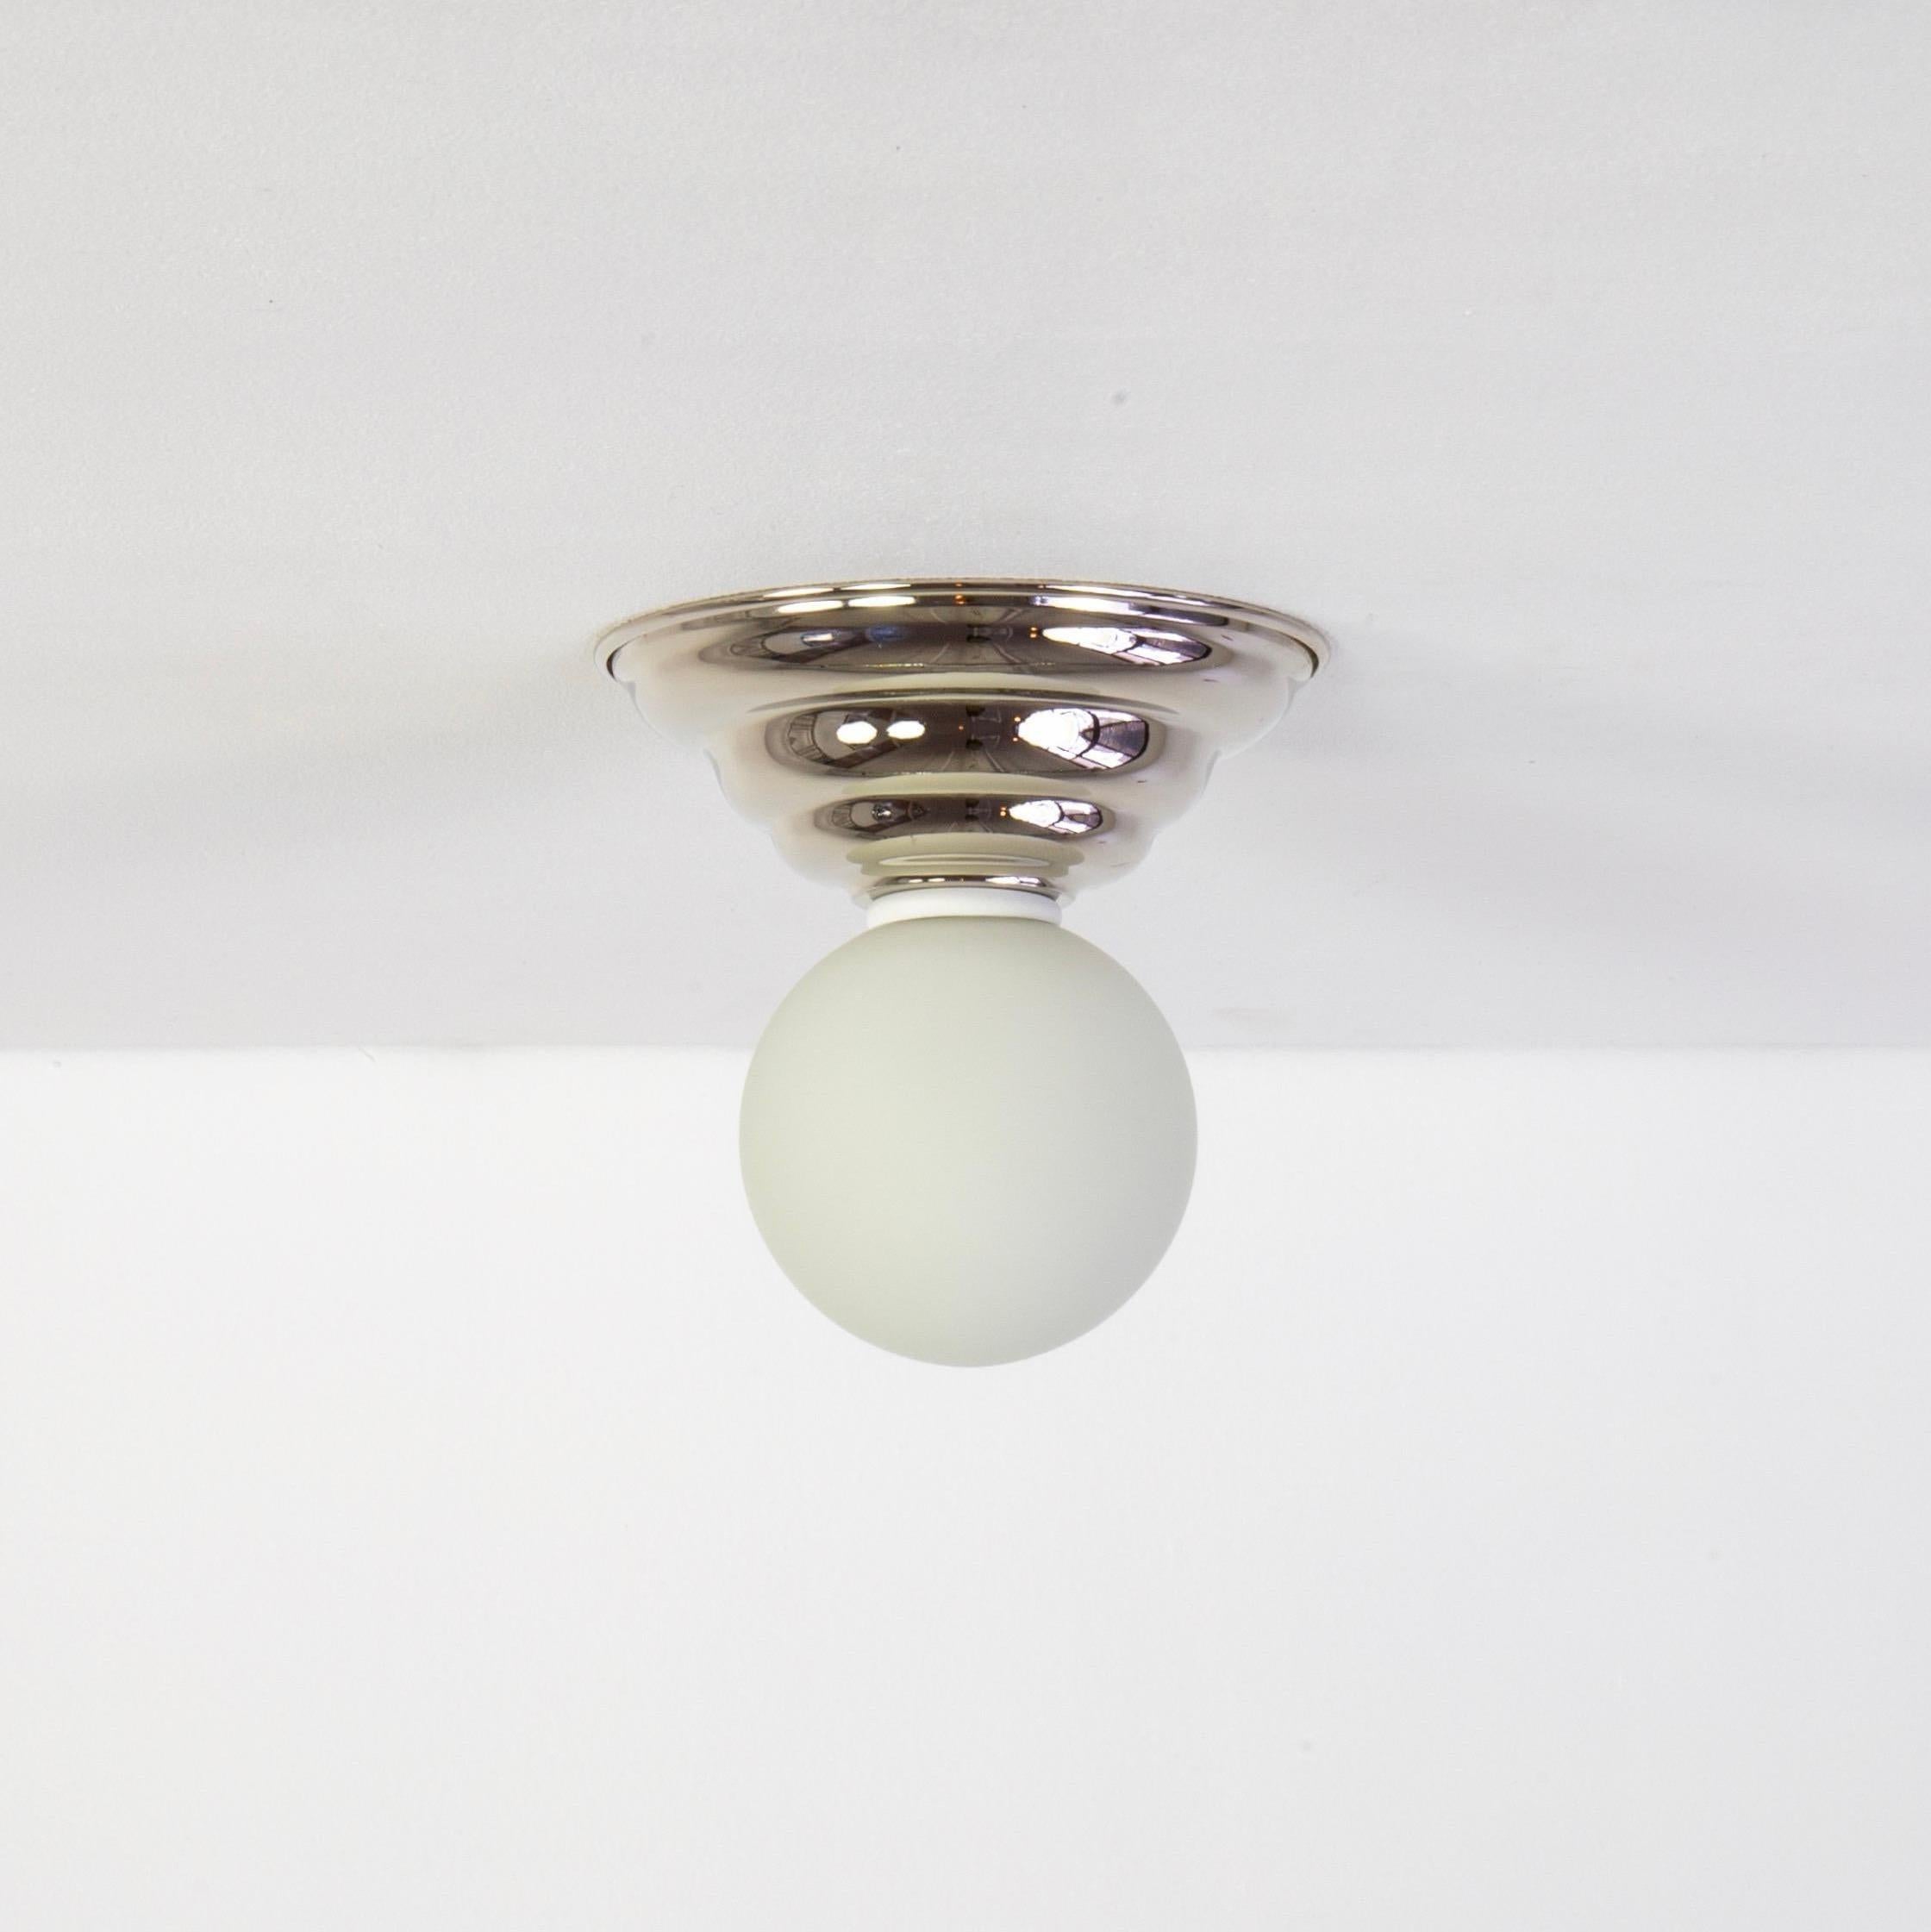 This listing is for 1x Hive Flush Mount in polished nickel designed and manufactured by Research.Lighting.

Materials: Brass, Steel & Glass
Finish: Polished Nickel
Electronics: 1x G9 Socket, 1x 4.5 Watt LED Bulb (included), 450 Lumens
ADA Compliant.